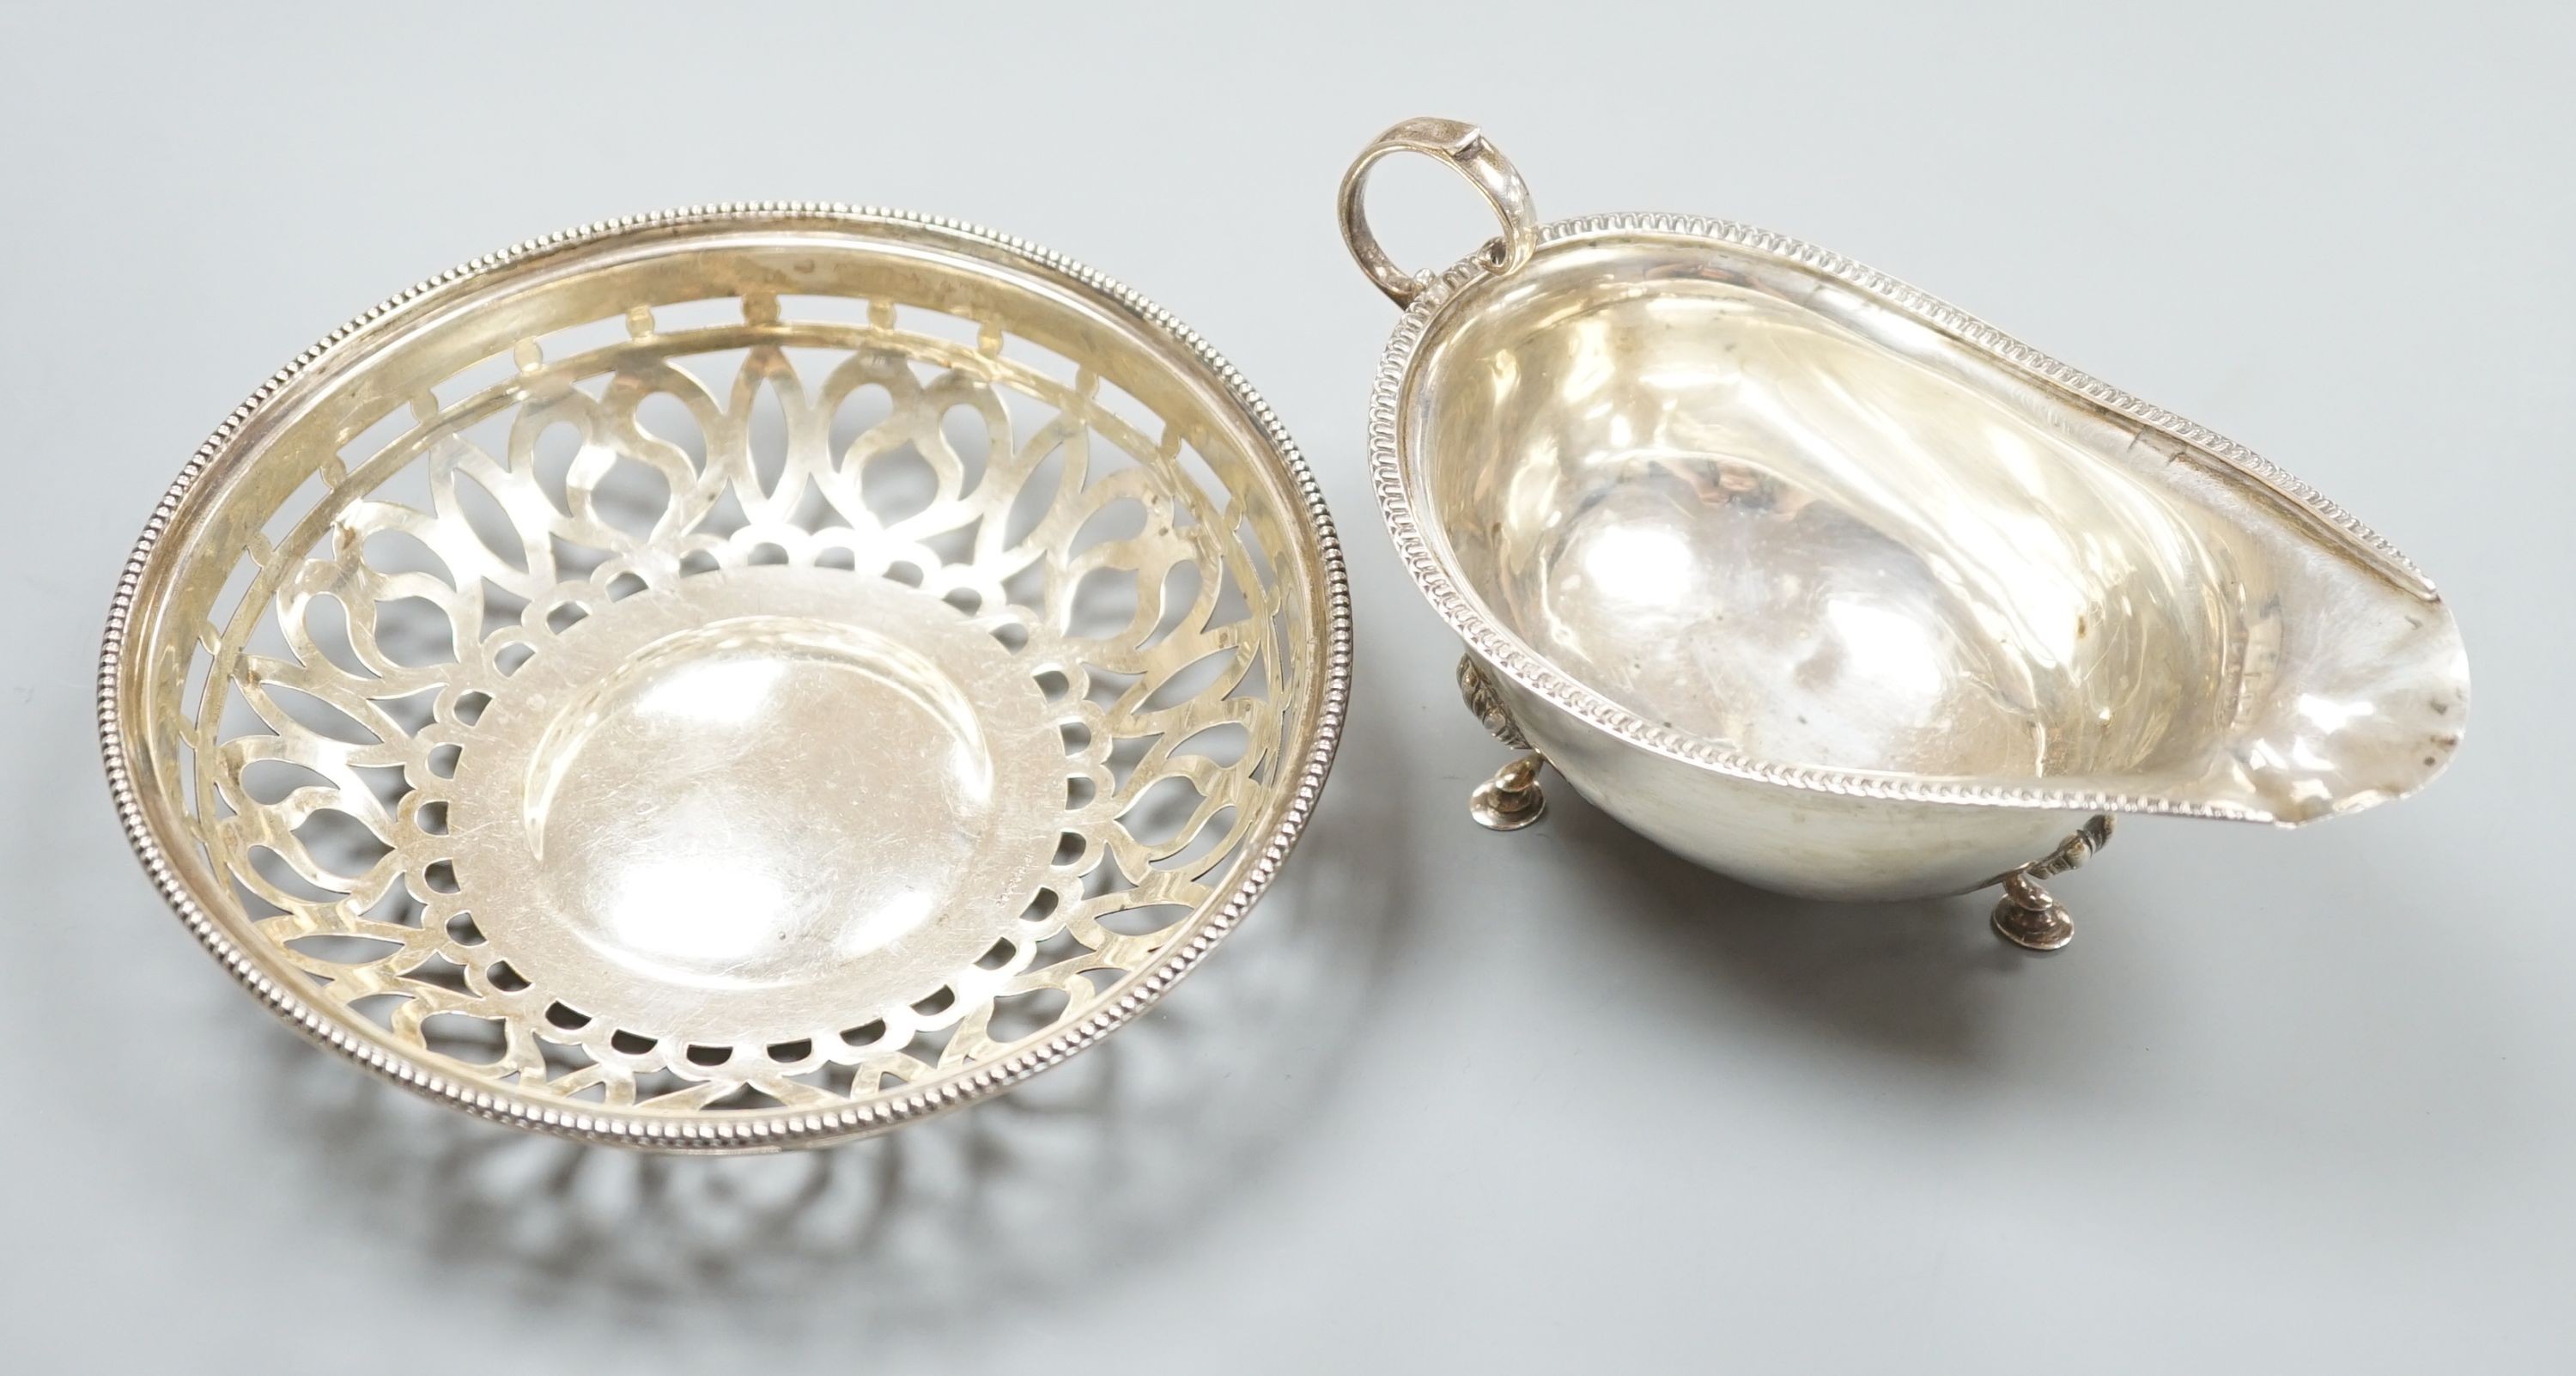 An oval sauce boat with French gadroon rim and flying scroll handle, Birmingham 1918 and a pierced circular bowl with beaded rim, Birmingham 1910, diameter 15.25cm, 207 grams.